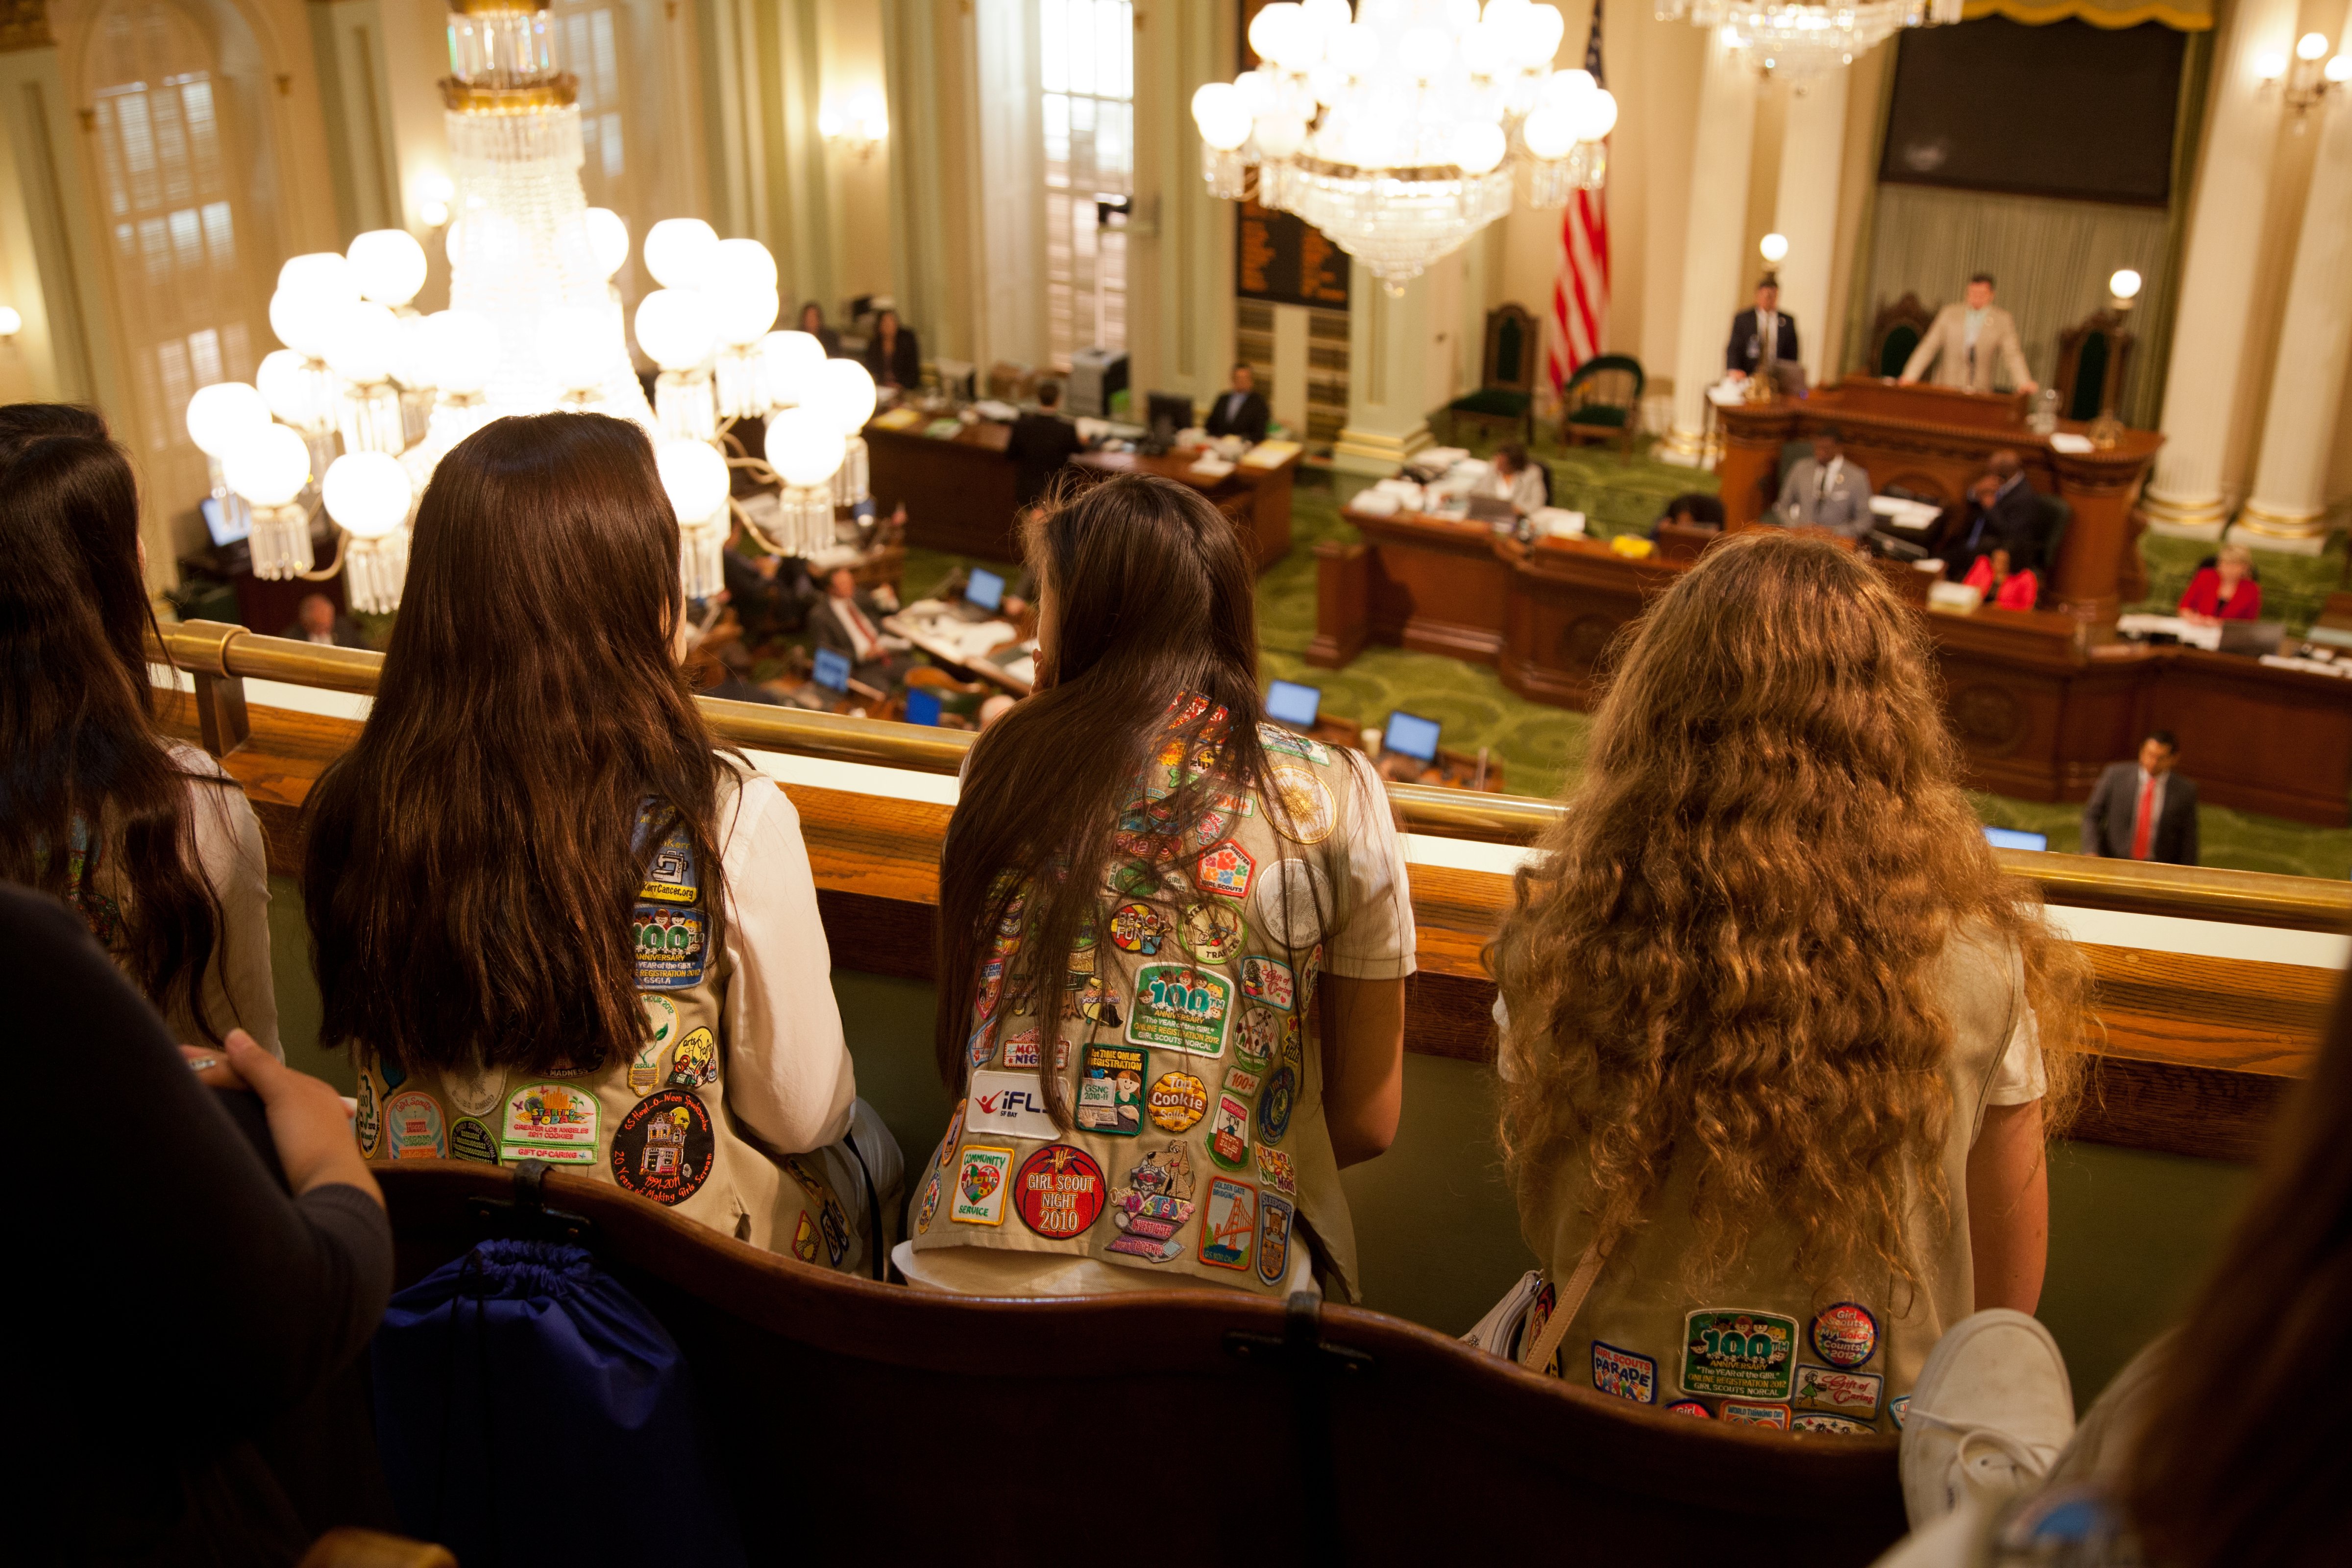 California Legislators Sign Proclamation In Sacramento, California Recognizing 100 Years Of The Gold Award, The Highest Rank In Girl Scouting